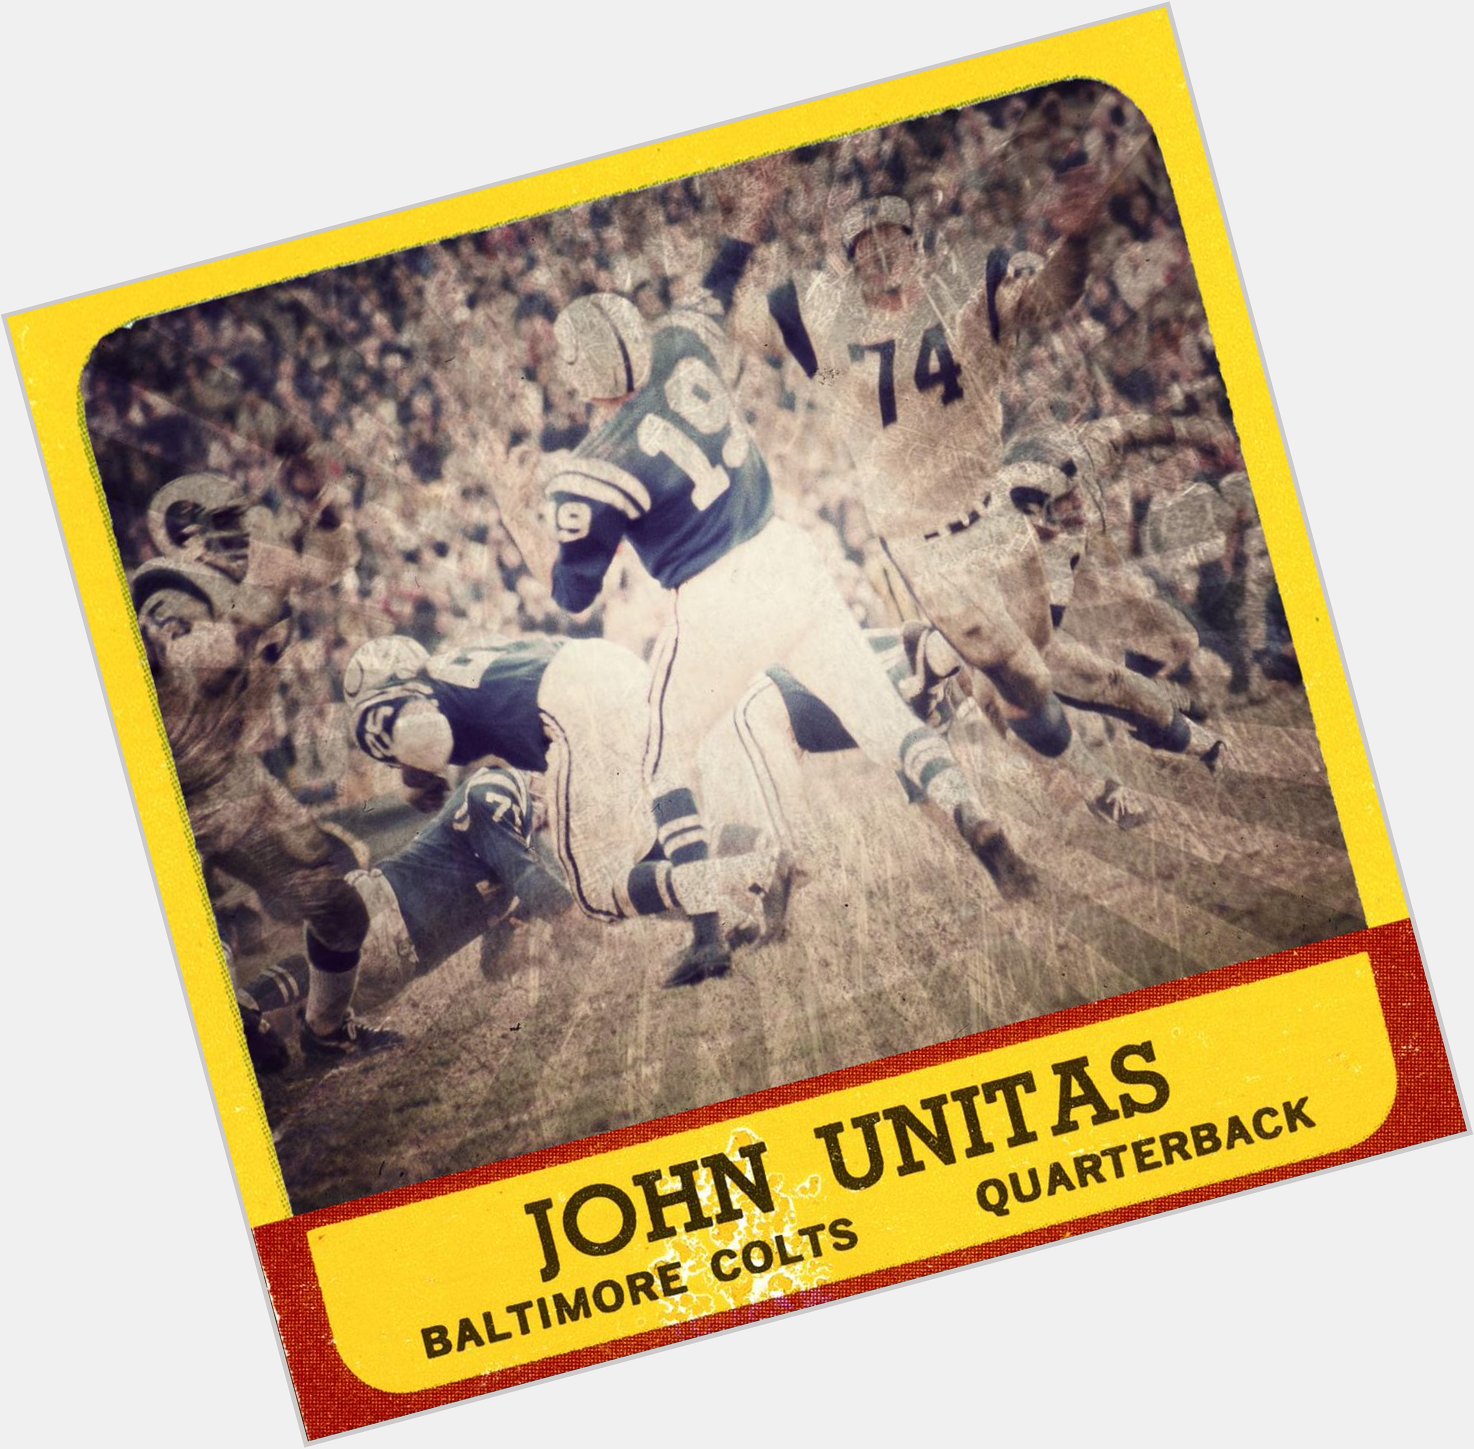 Happy birthday to one of the all-time greats. 

The late, great, legendary \"Golden Arm\" - Johnny Unitas. 